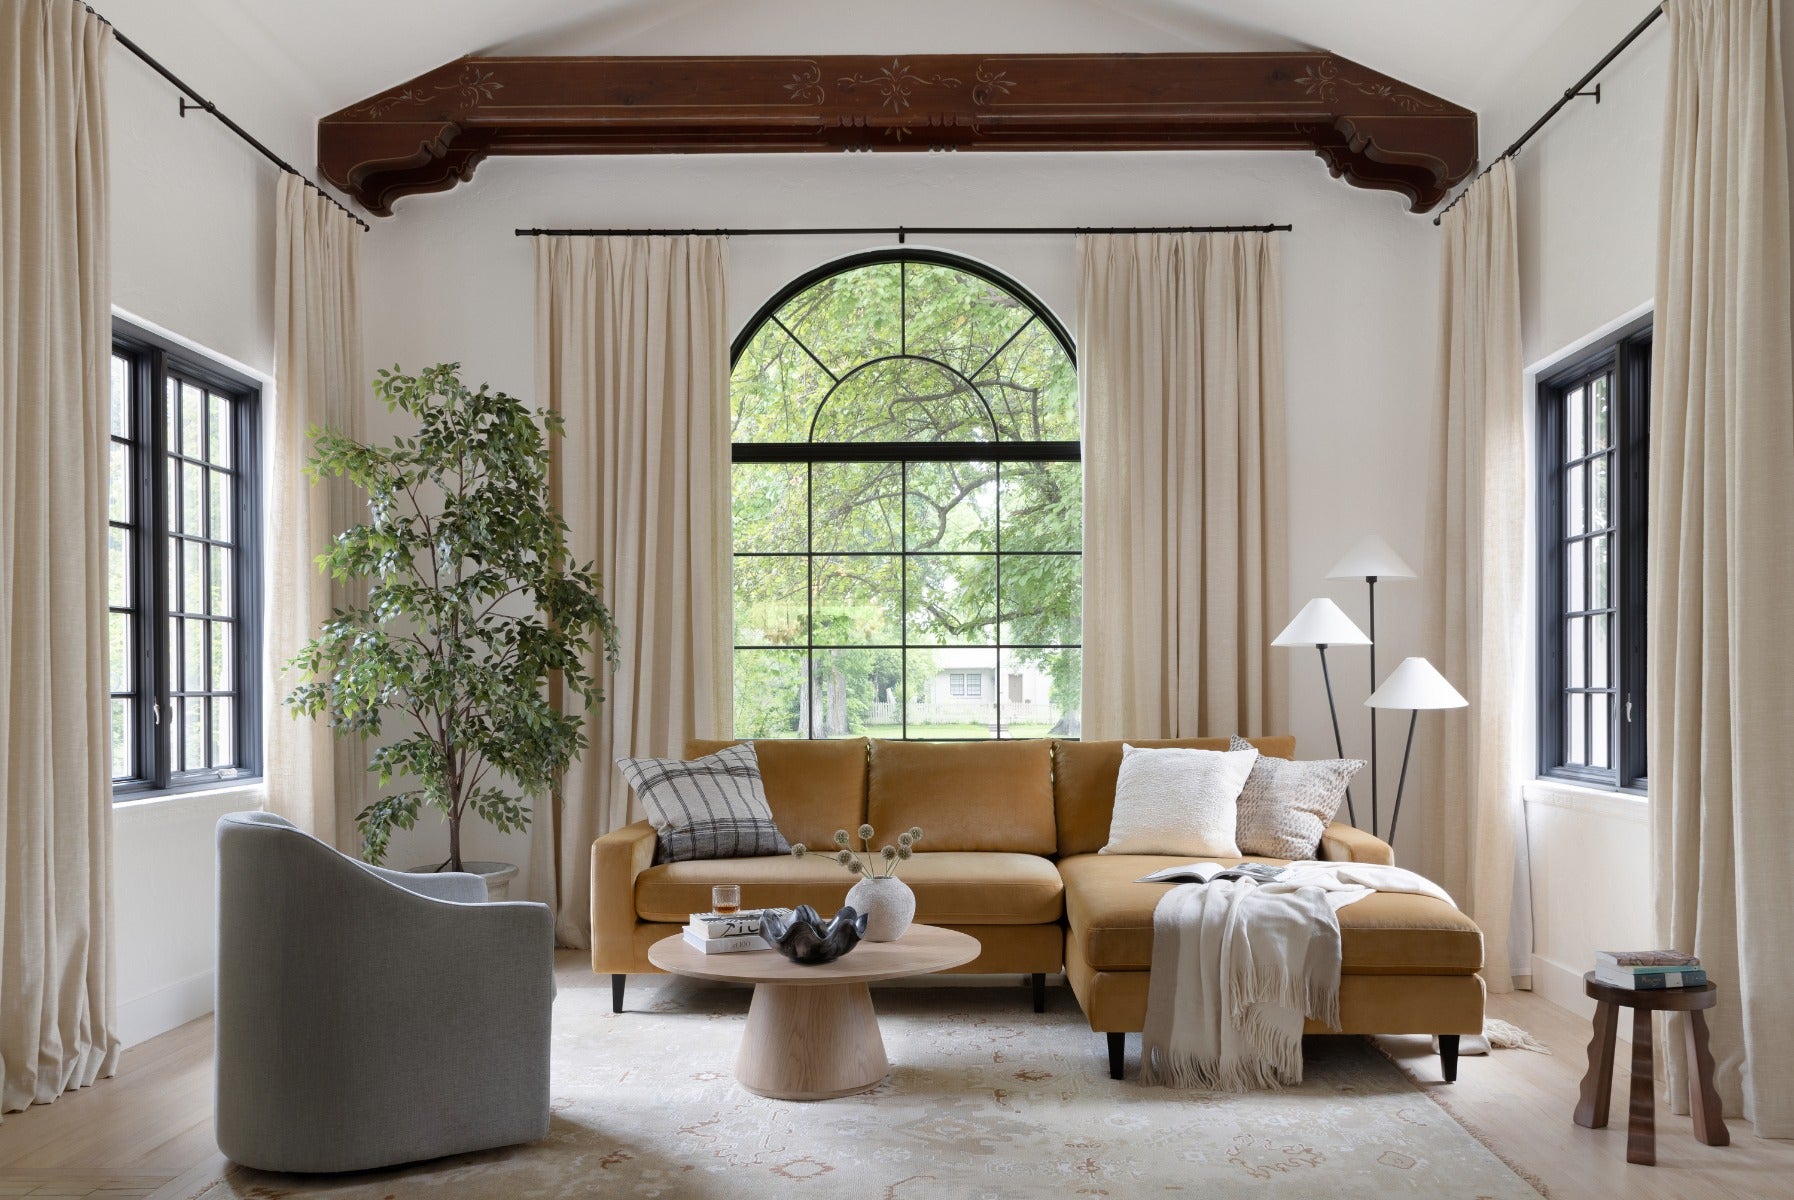 A cozy living room features a mustard-colored sectional sofa adorned with throw pillows and a blanket. A round wooden coffee table holds decor items. A large arched window with black frames and beige curtains opens to greenery outside. A floor lamp and an accent chair complete the space.